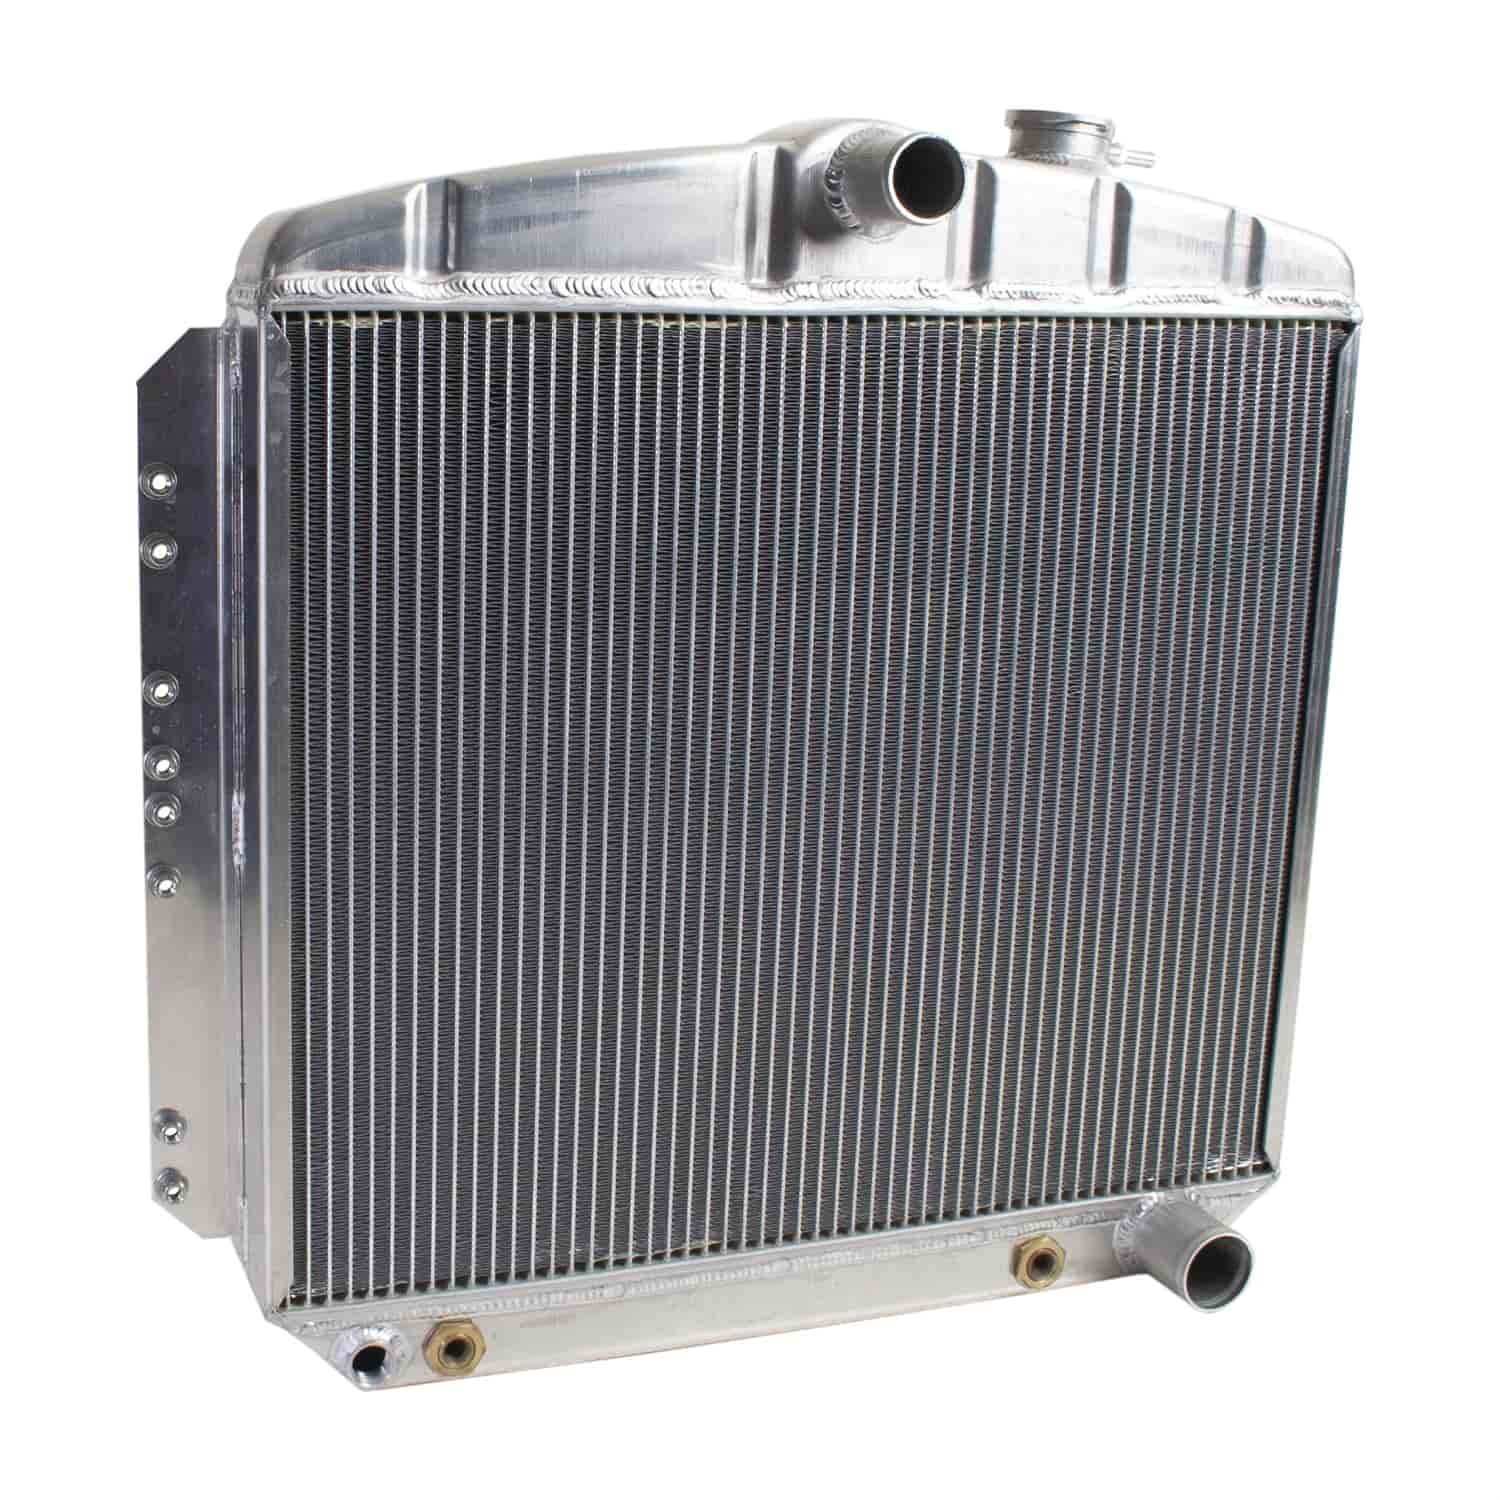 ExactFit Radiator for 1949-1954 Chevrolet Car with Transmission Cooler